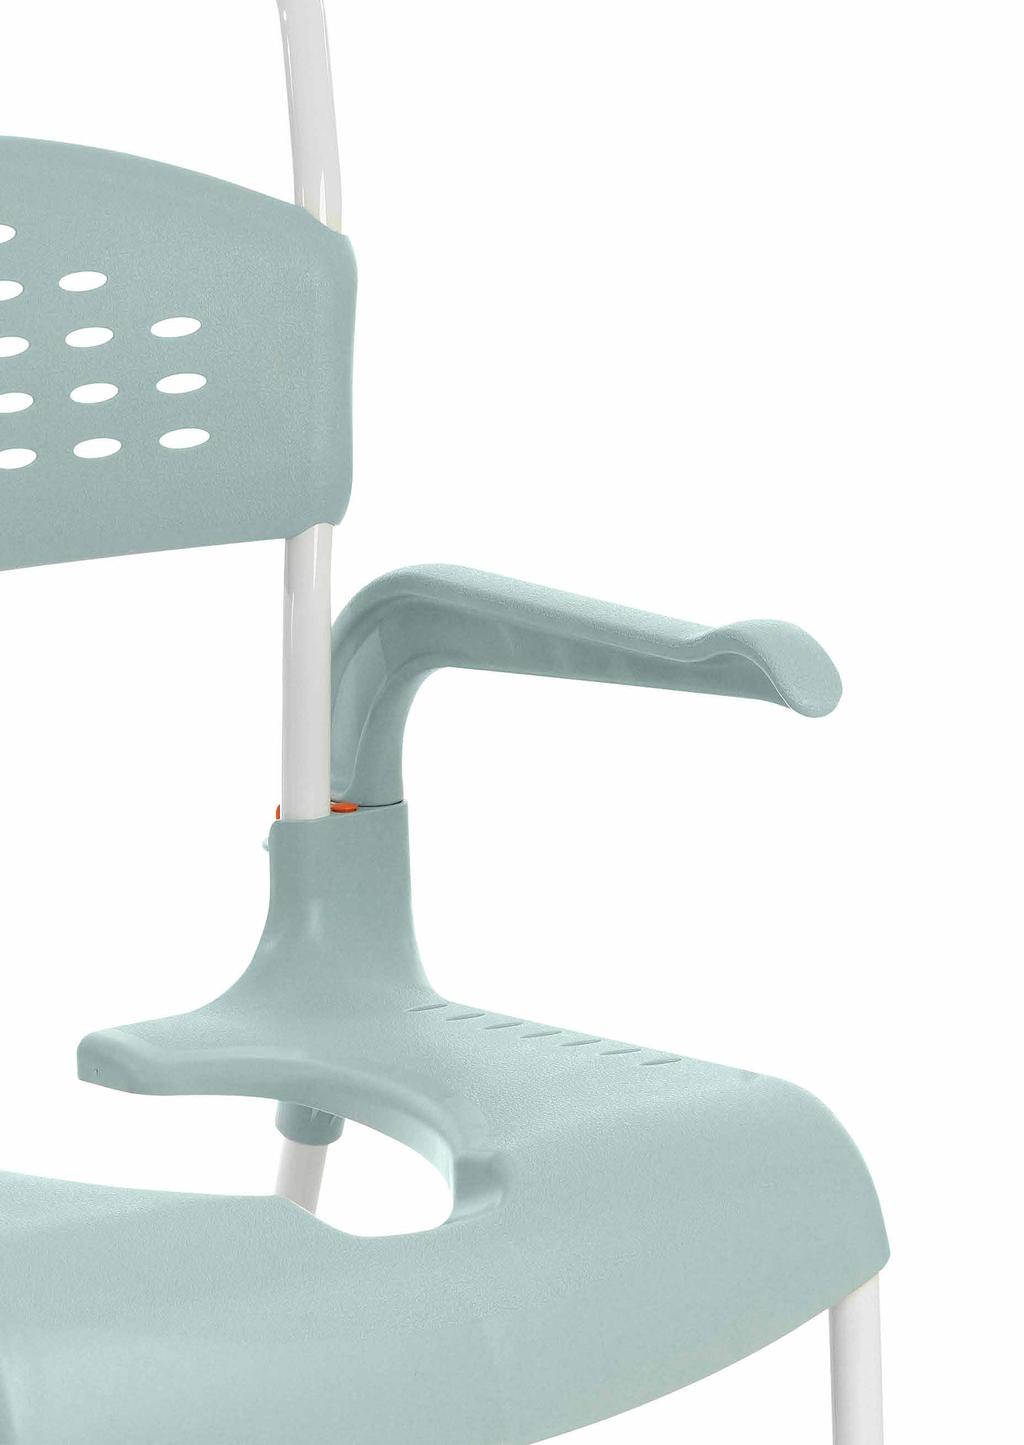 Etac Clean shower commode chair Etac Clean is secure, safe and simple for both users and carers.